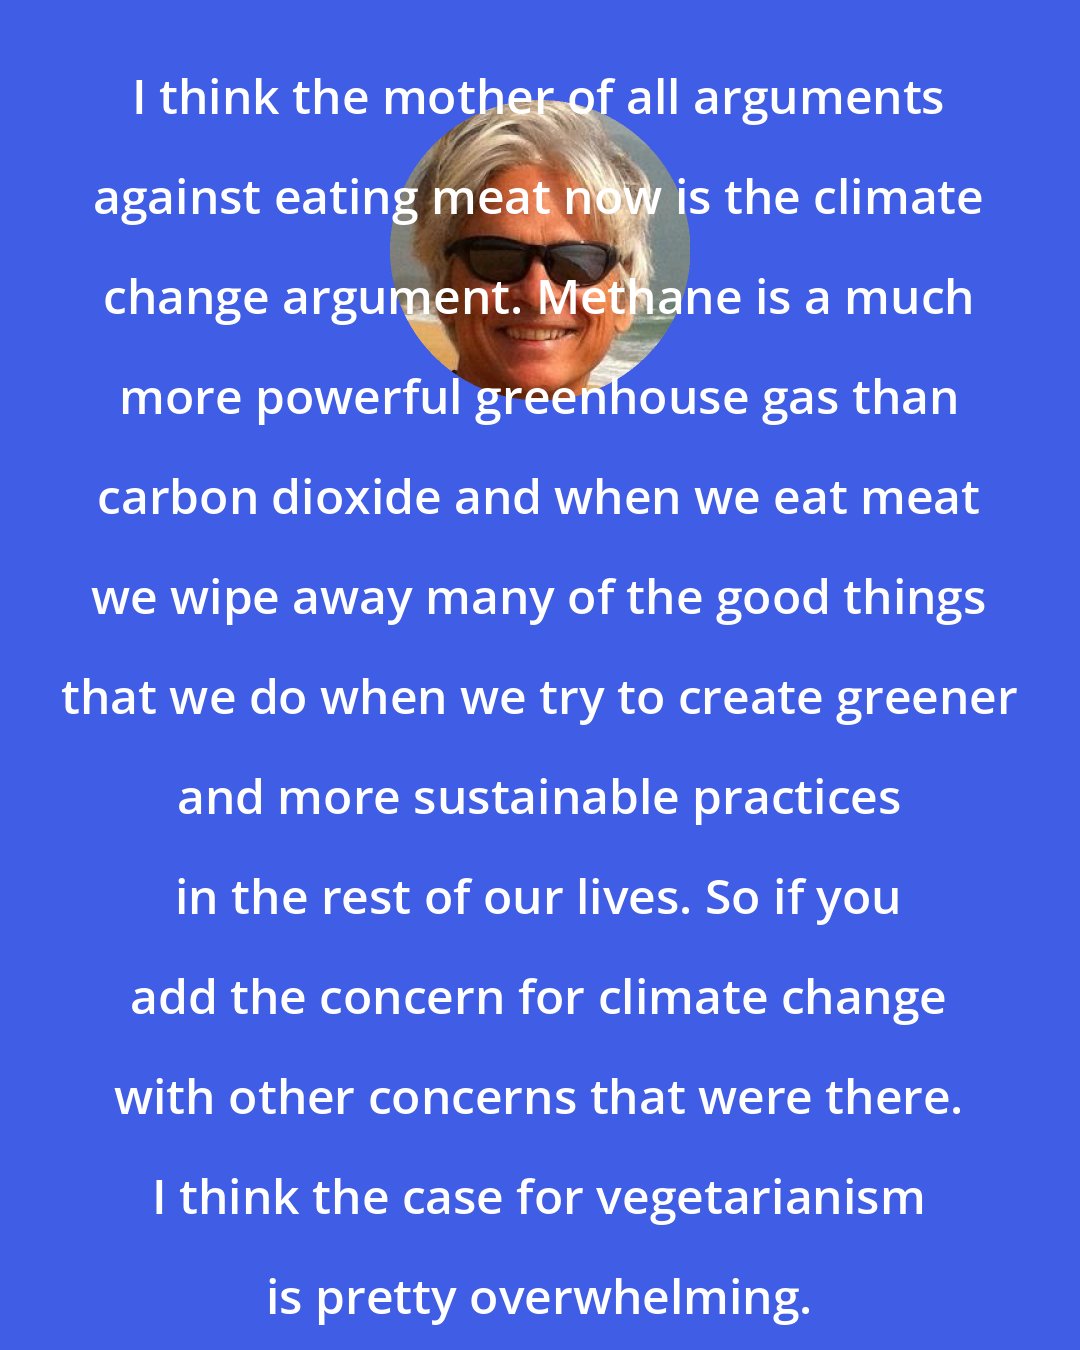 Dale Jamieson: I think the mother of all arguments against eating meat now is the climate change argument. Methane is a much more powerful greenhouse gas than carbon dioxide and when we eat meat we wipe away many of the good things that we do when we try to create greener and more sustainable practices in the rest of our lives. So if you add the concern for climate change with other concerns that were there. I think the case for vegetarianism is pretty overwhelming.